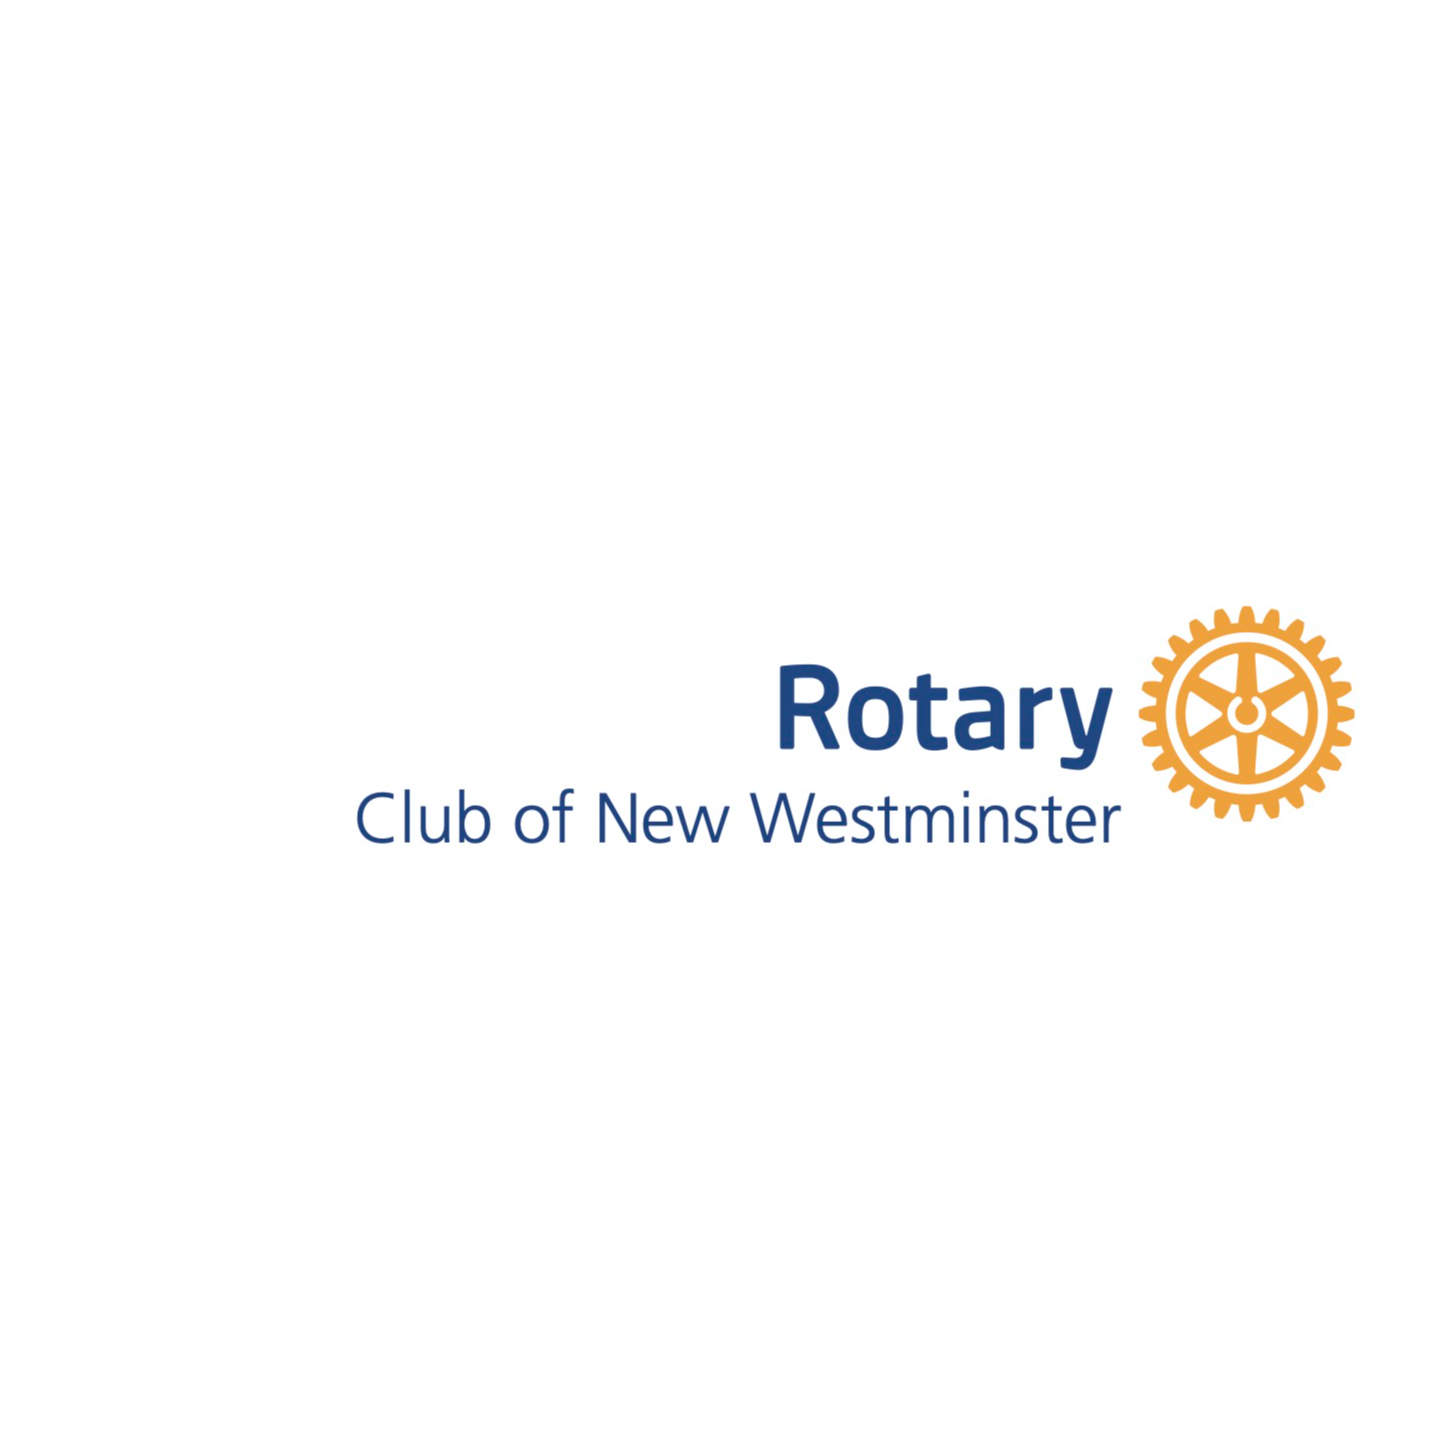 Rotary Club of New Westminster's logo